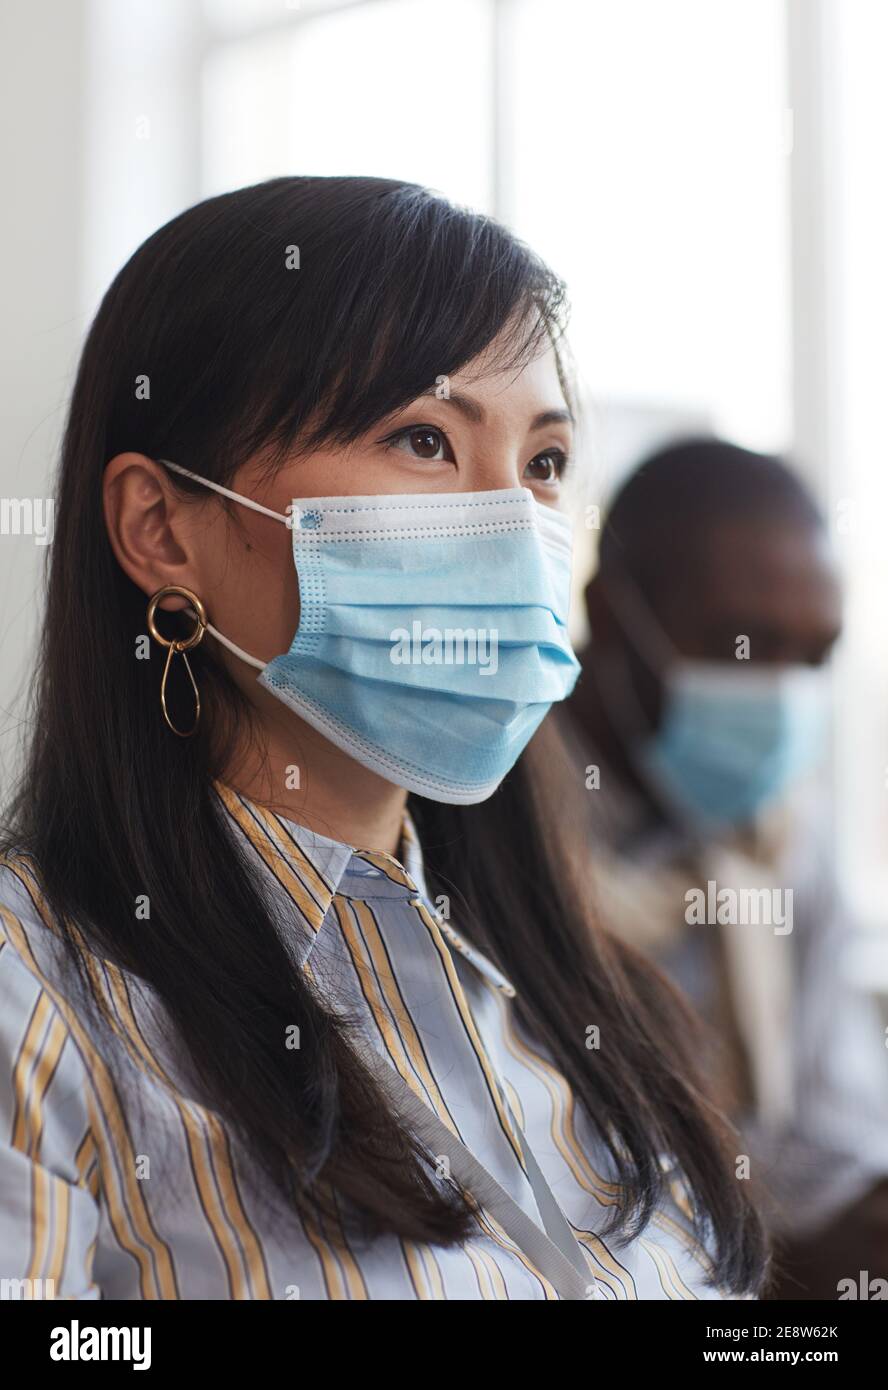 Vertical portrait of Asian businesswoman wearing mask and looking away while sitting in audience at business conference Stock Photo